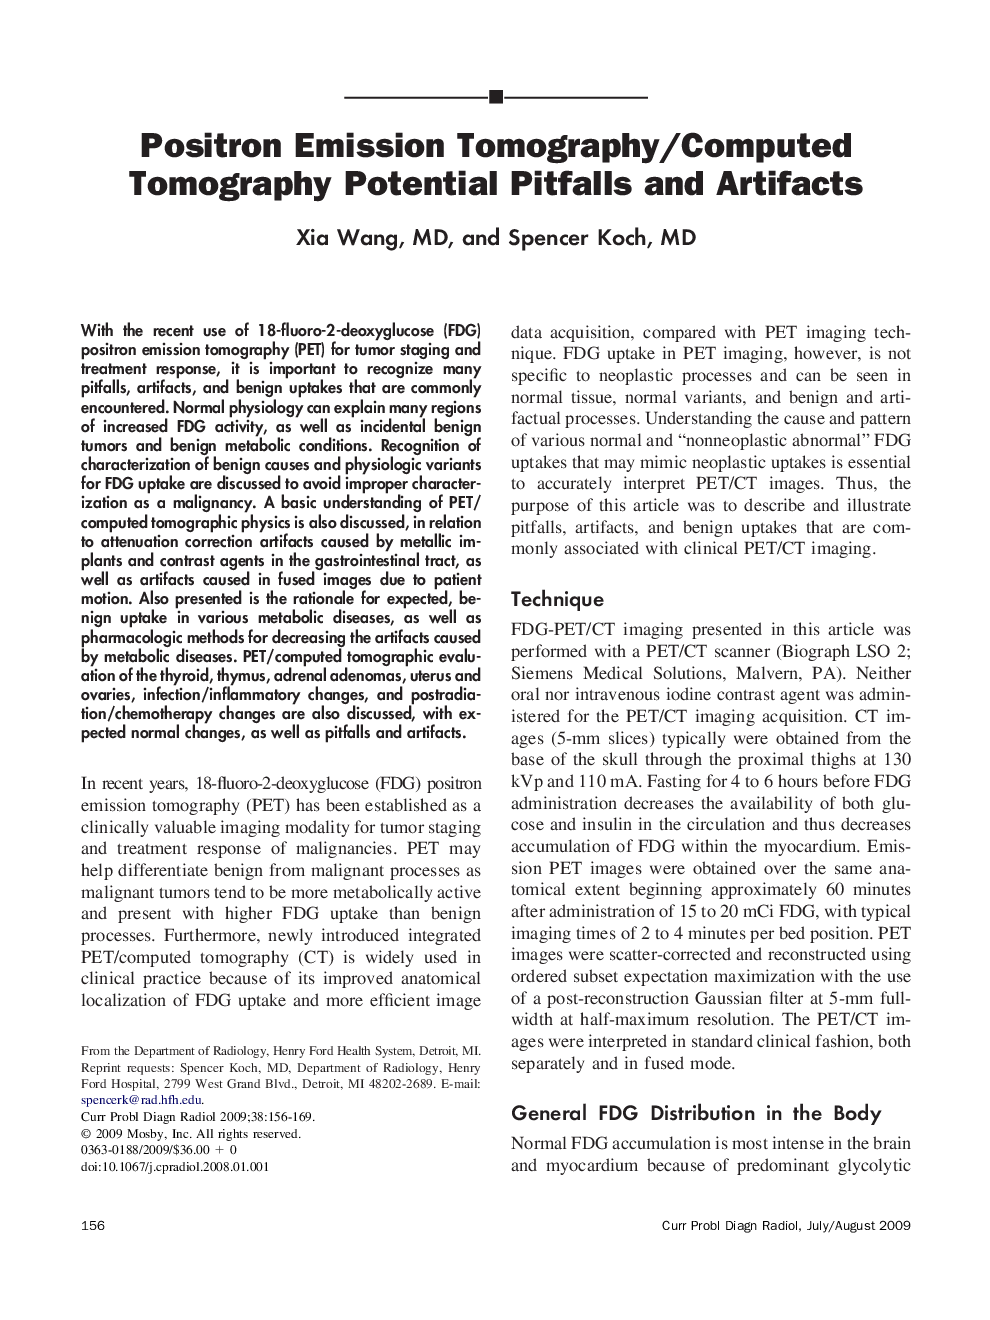 Positron Emission Tomography/Computed Tomography Potential Pitfalls and Artifacts